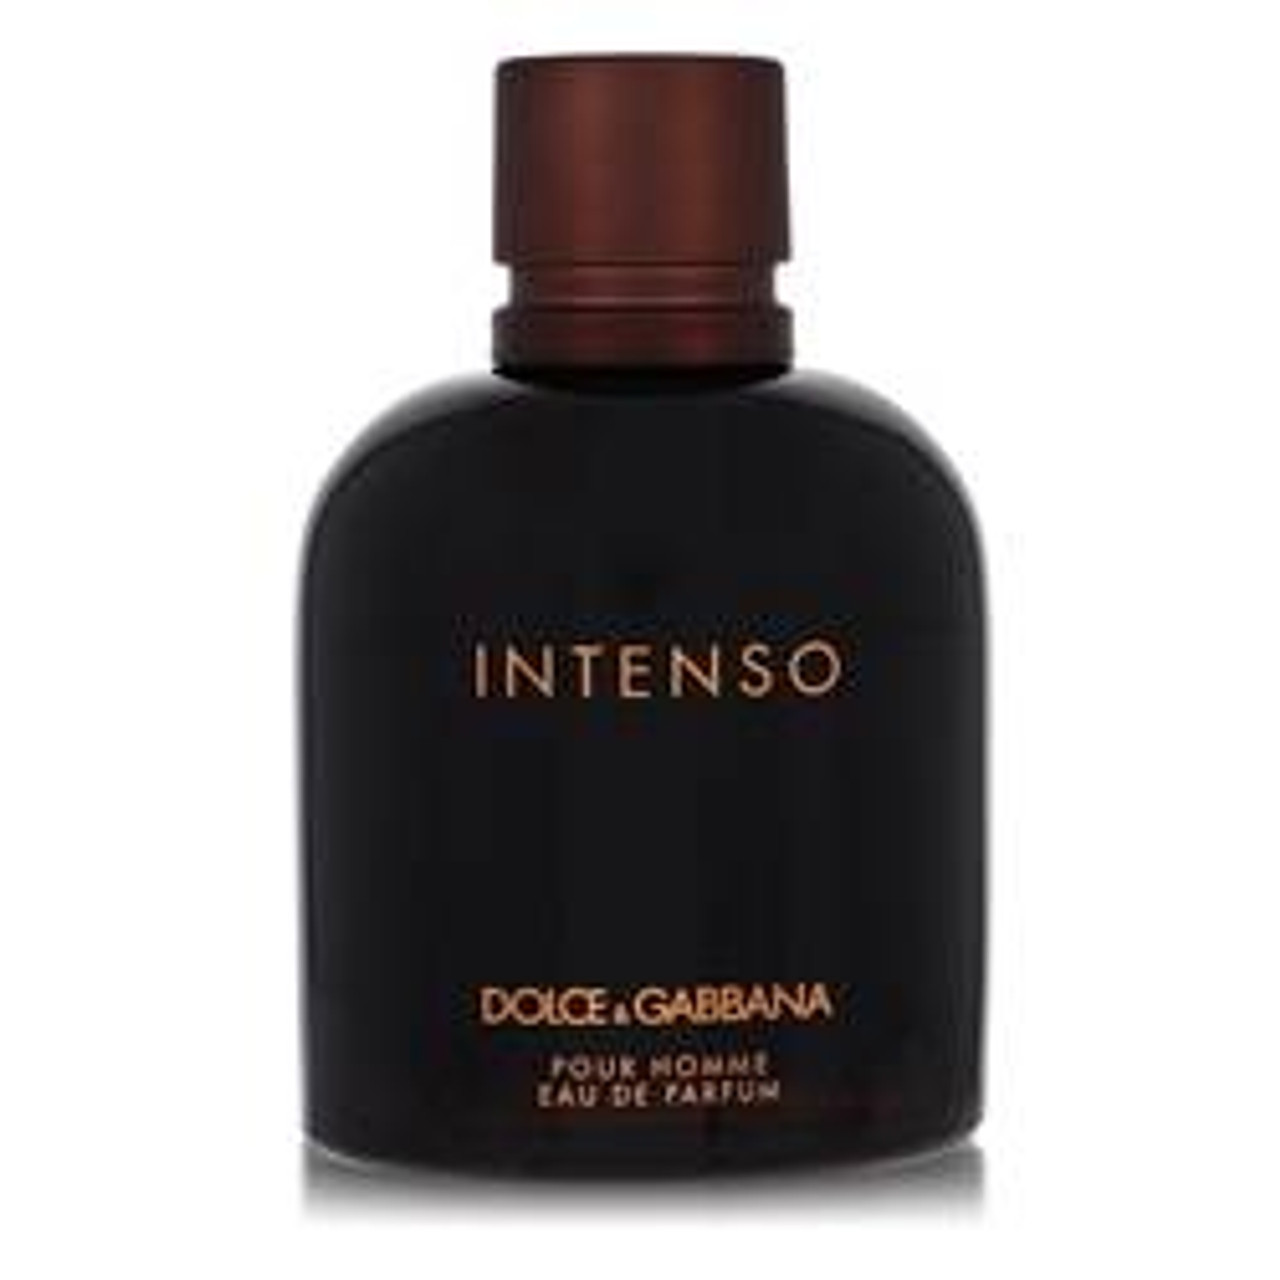 Dolce & Gabbana Intenso Cologne By Dolce & Gabbana Eau De Parfum Spray (Tester) 4.2 oz for Men - [From 156.00 - Choose pk Qty ] - *Ships from Miami